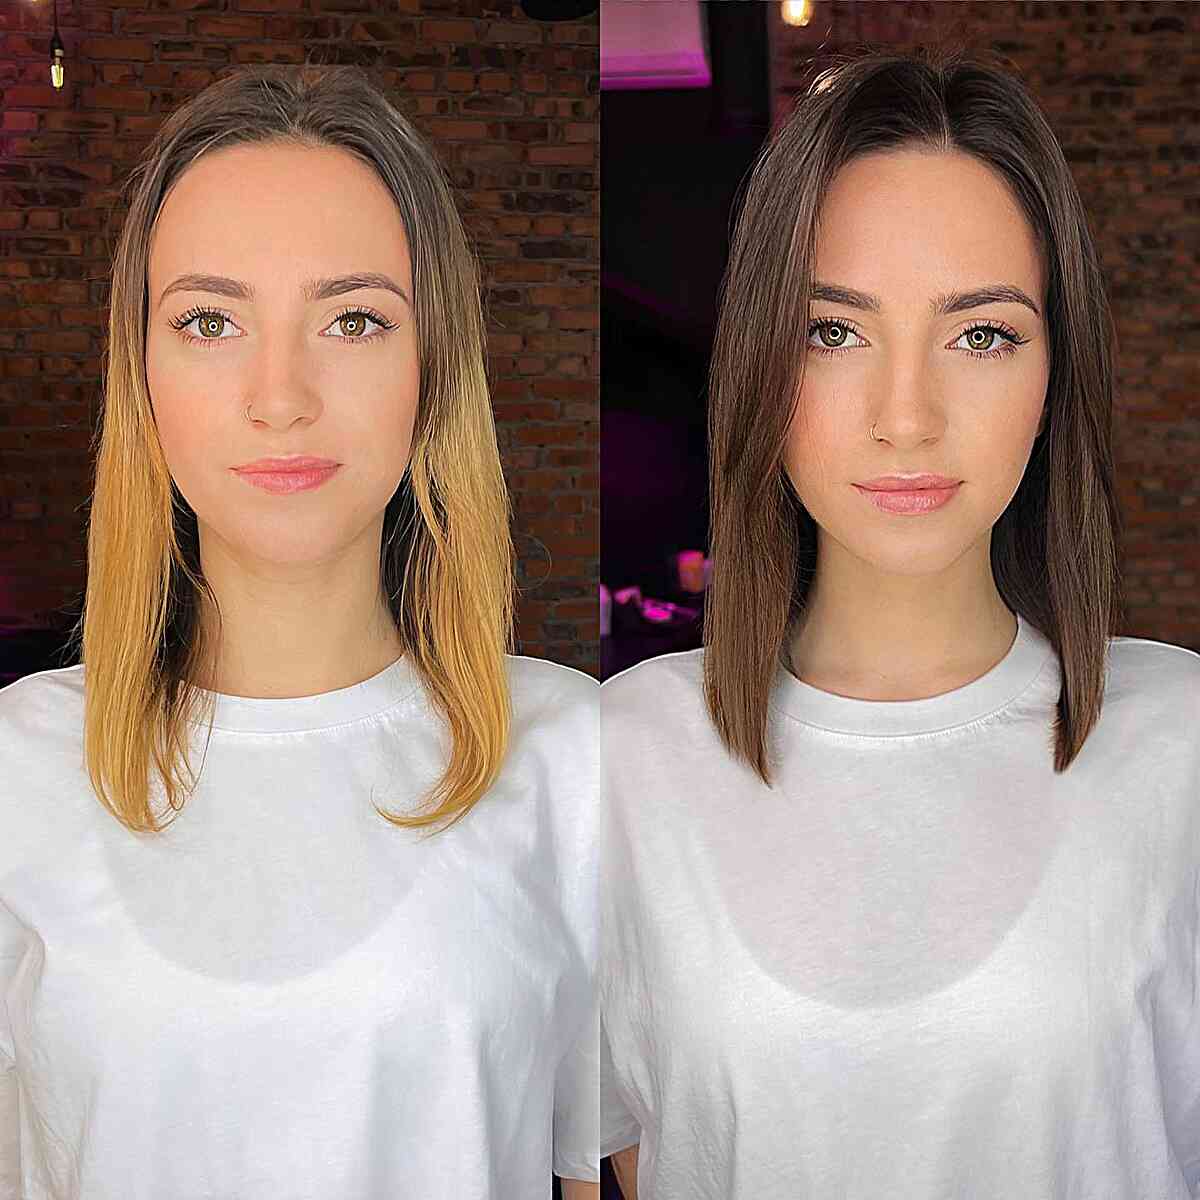 Brunette Slob Straight Lob Haircut for ladies in their 30s